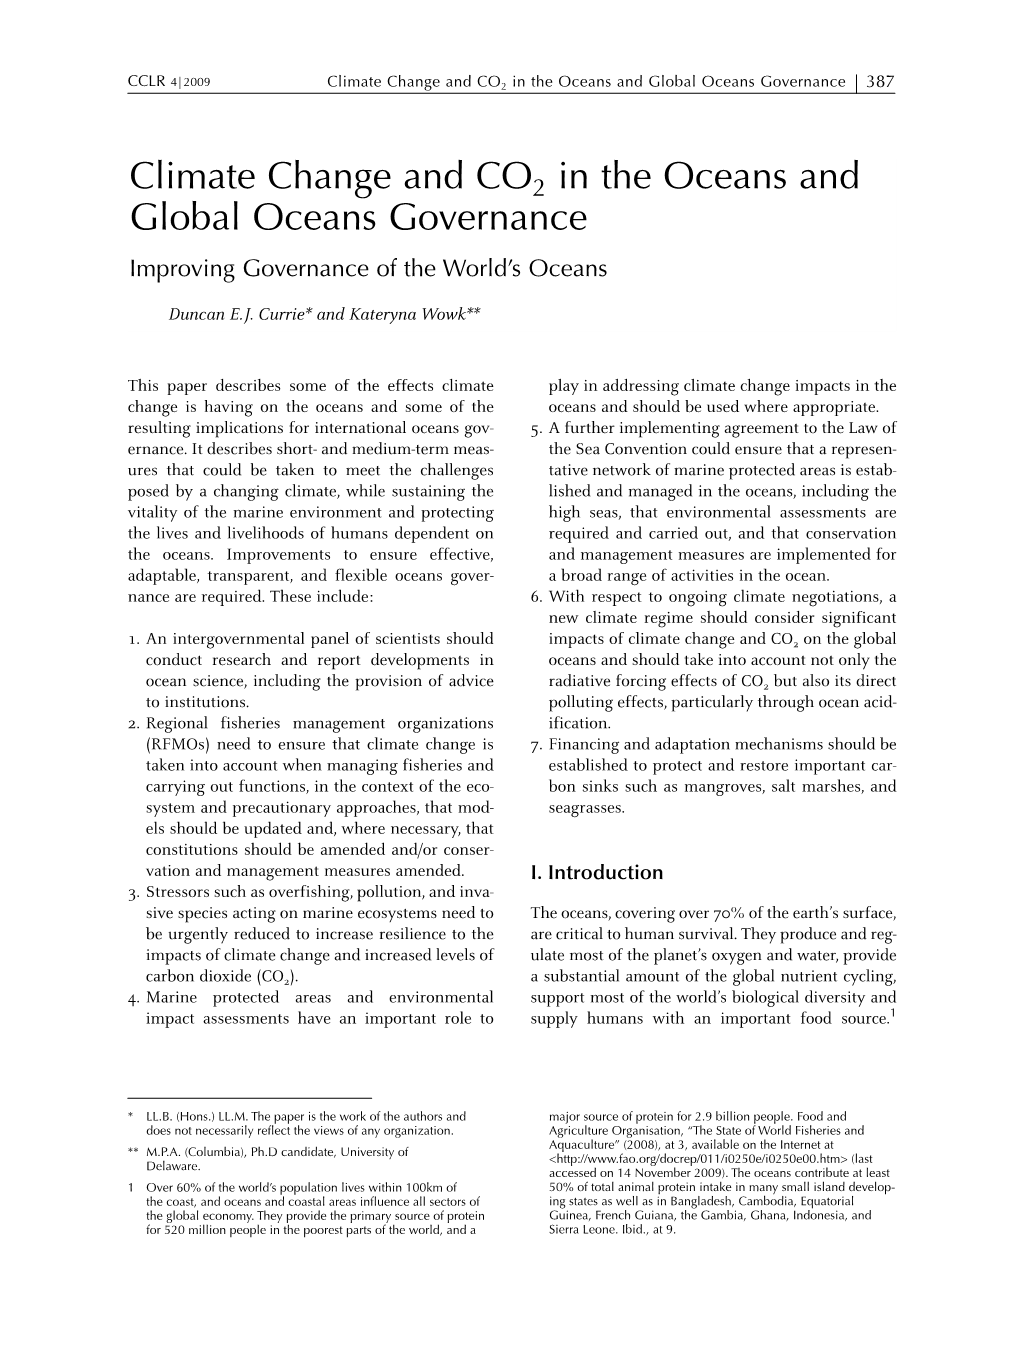 Climate Change and CO2 in the Oceans and Global Oceans Governance 387